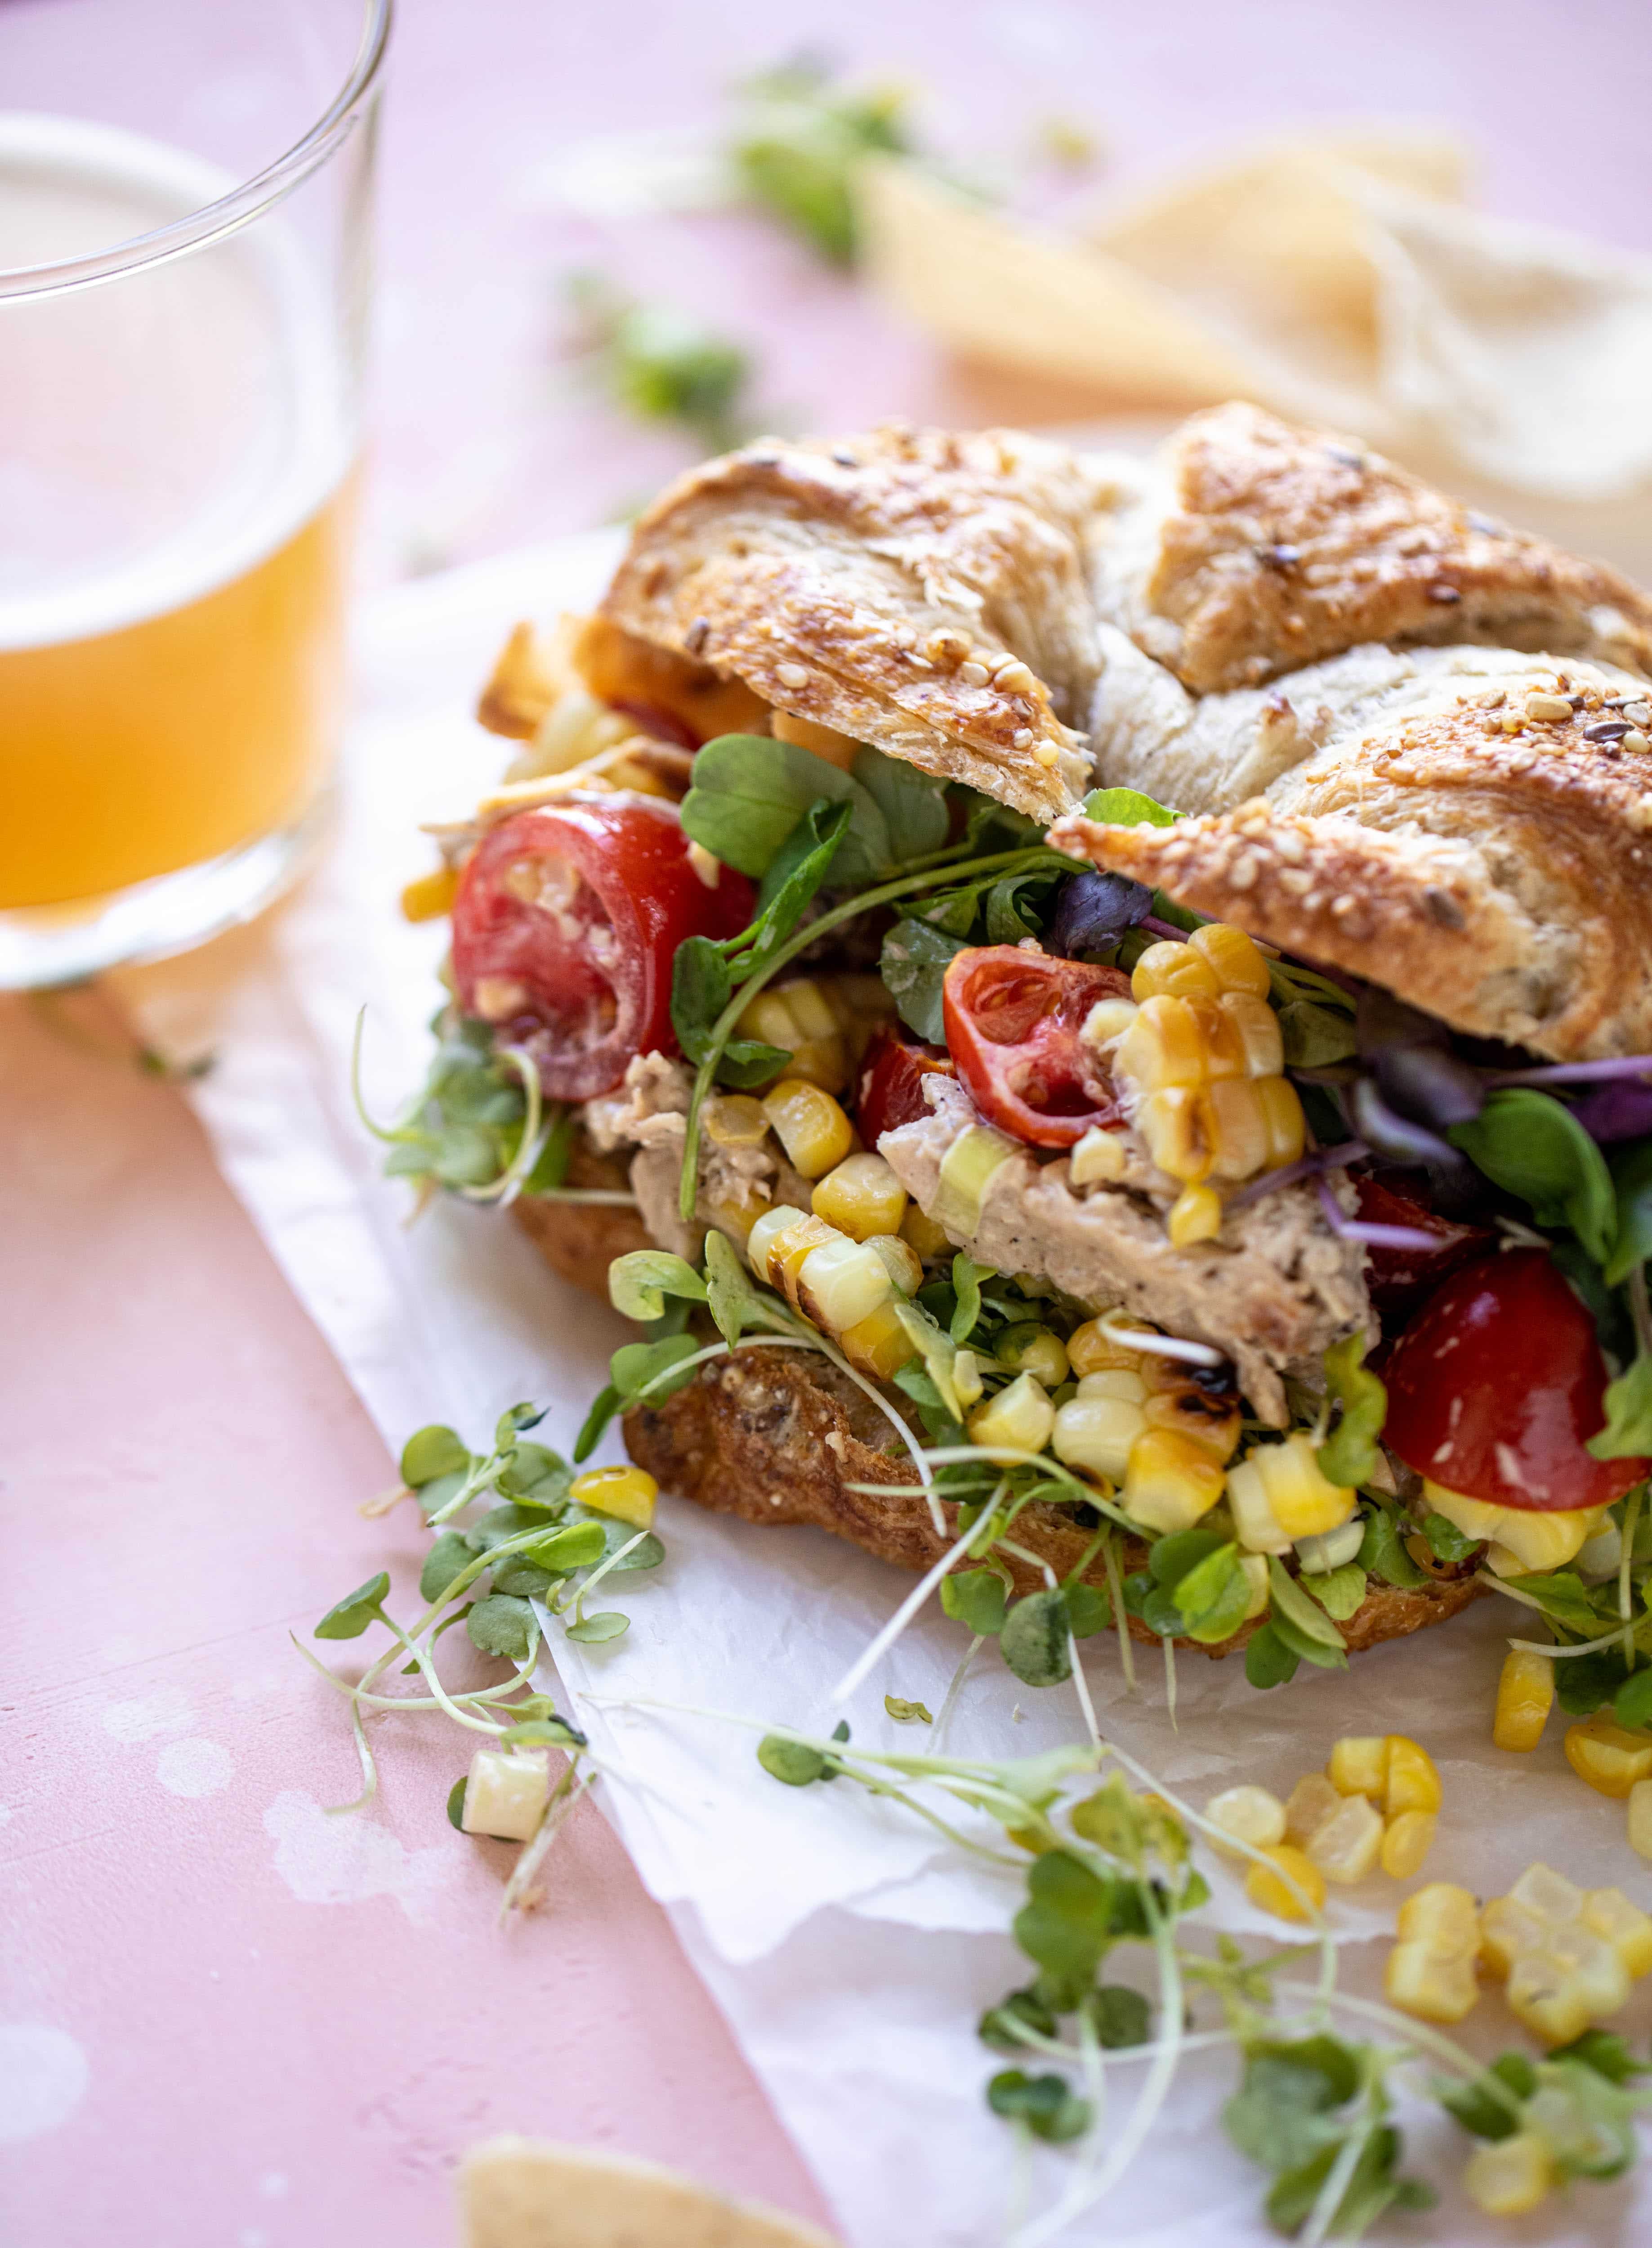 This smoky summer chicken salad is incredible! So much flavor from grilled chicken, sweet cherry tomatoes, corn, cheddar cheese and a secret ingredient!